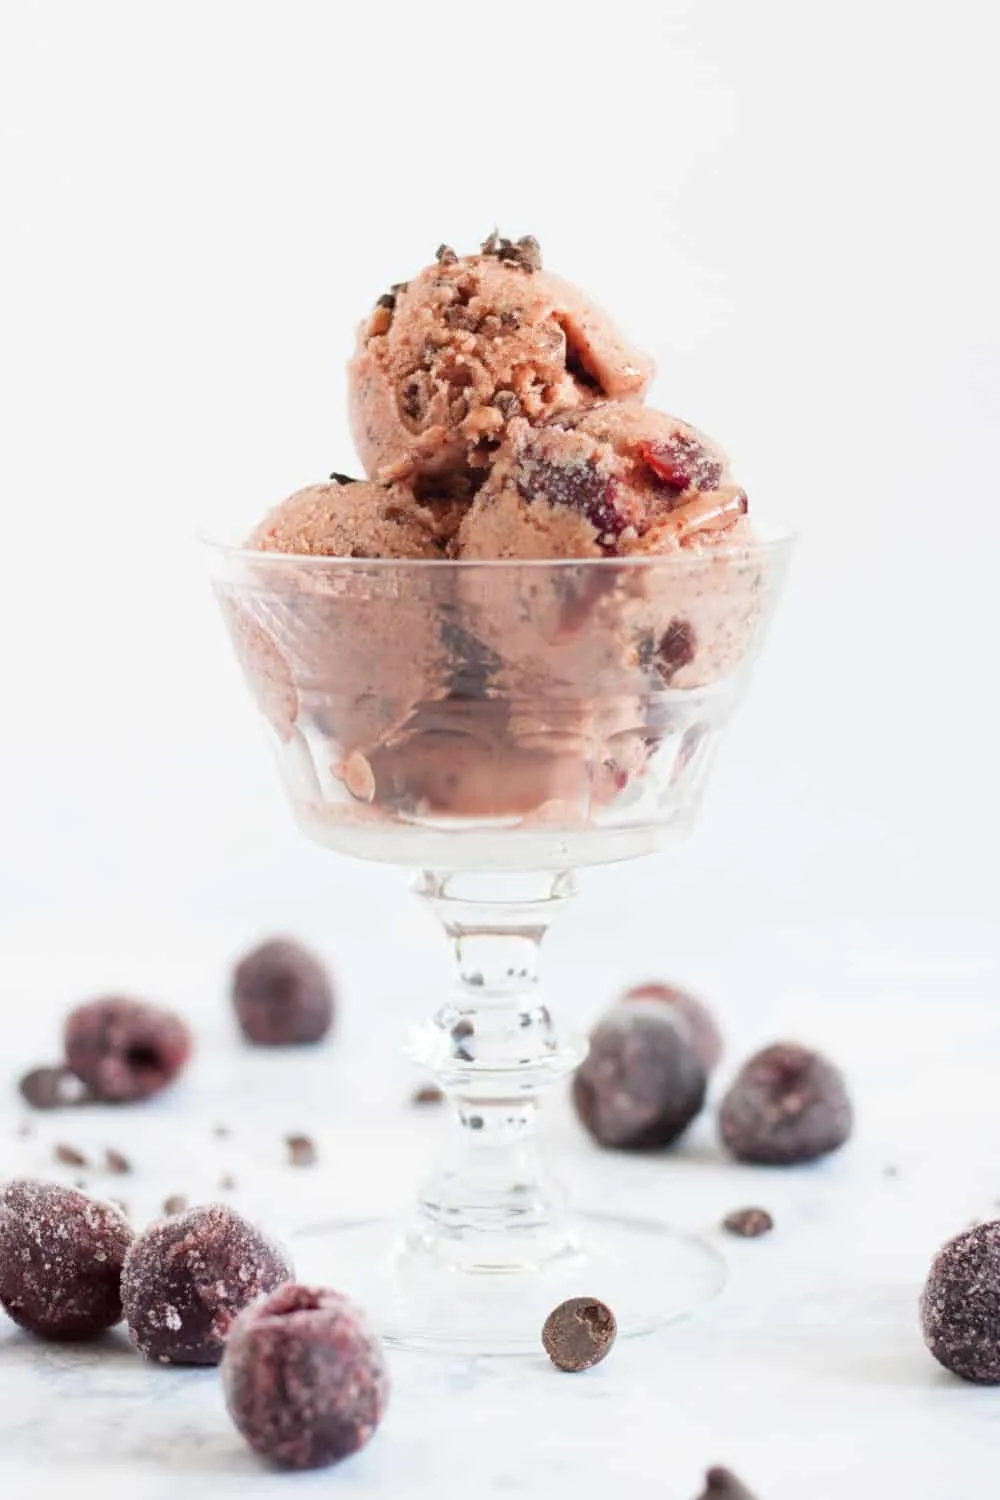 A unique banana ice cream flavor inspired by Cherry Garcia! This chocolate cherry banana ice cream is easy to make, soft straight out of the freezer, and is a 